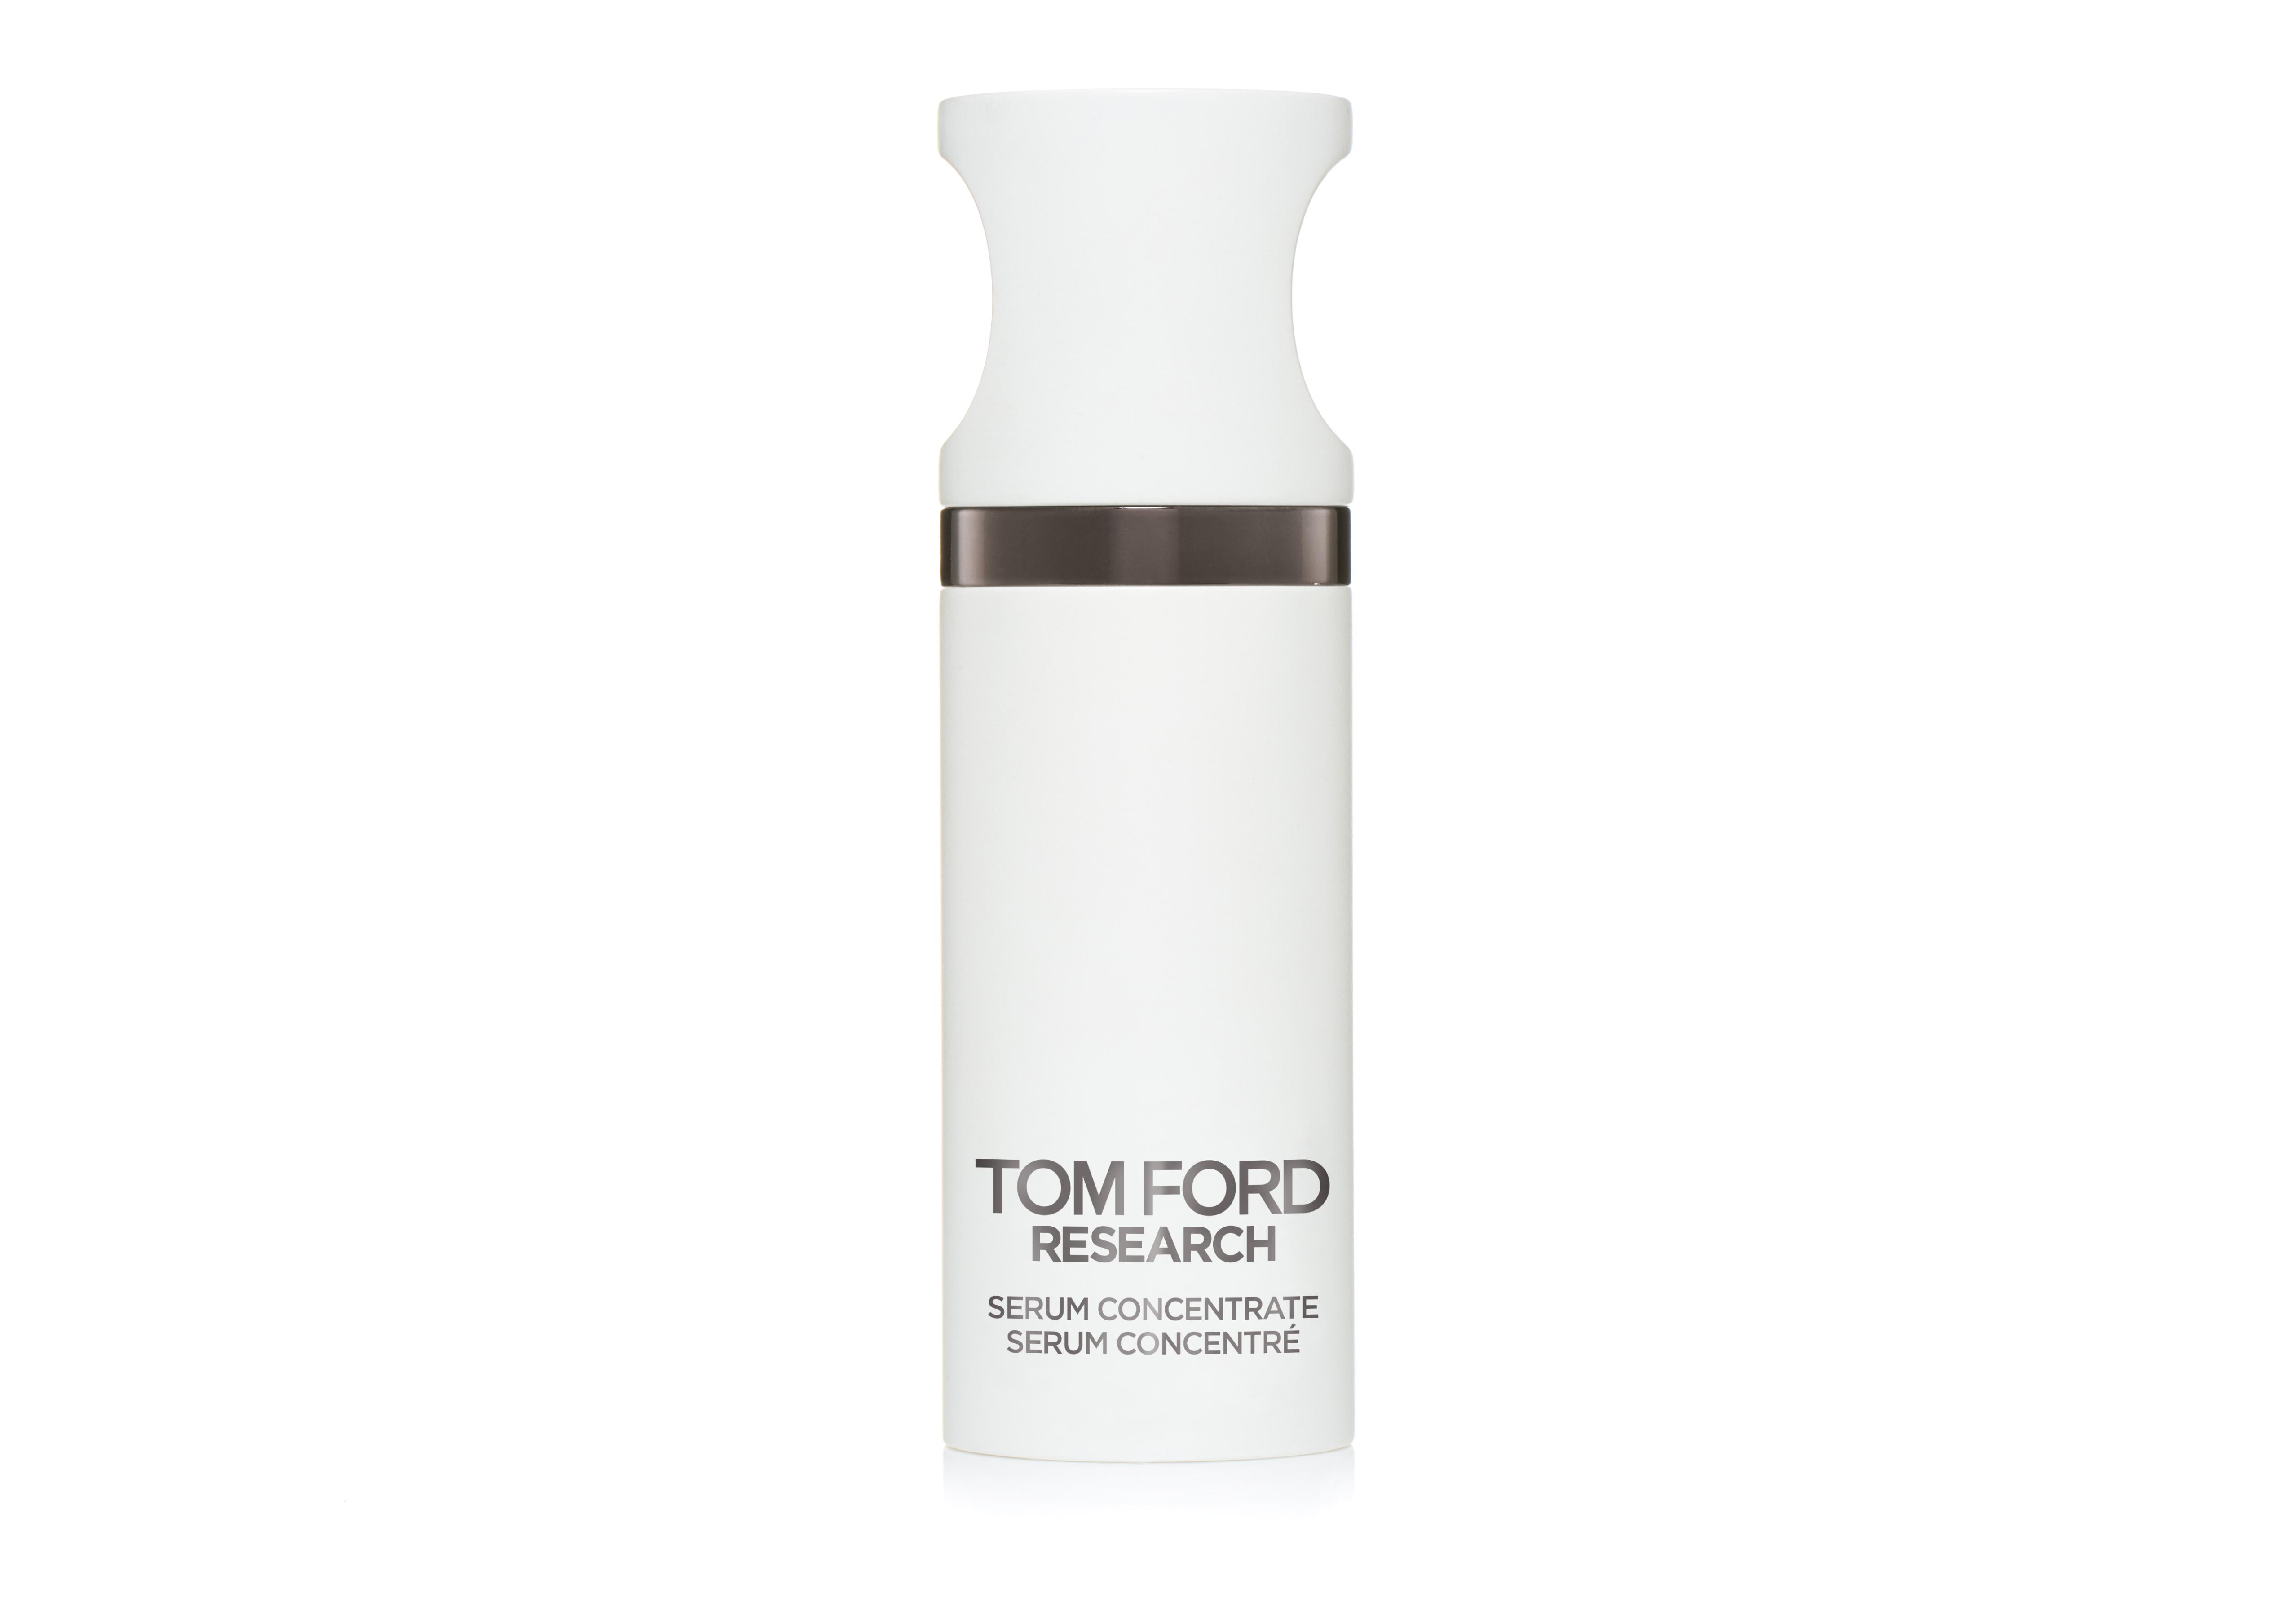 Tom Ford TOM FORD RESEARCH SERUM CONCENTRATE 